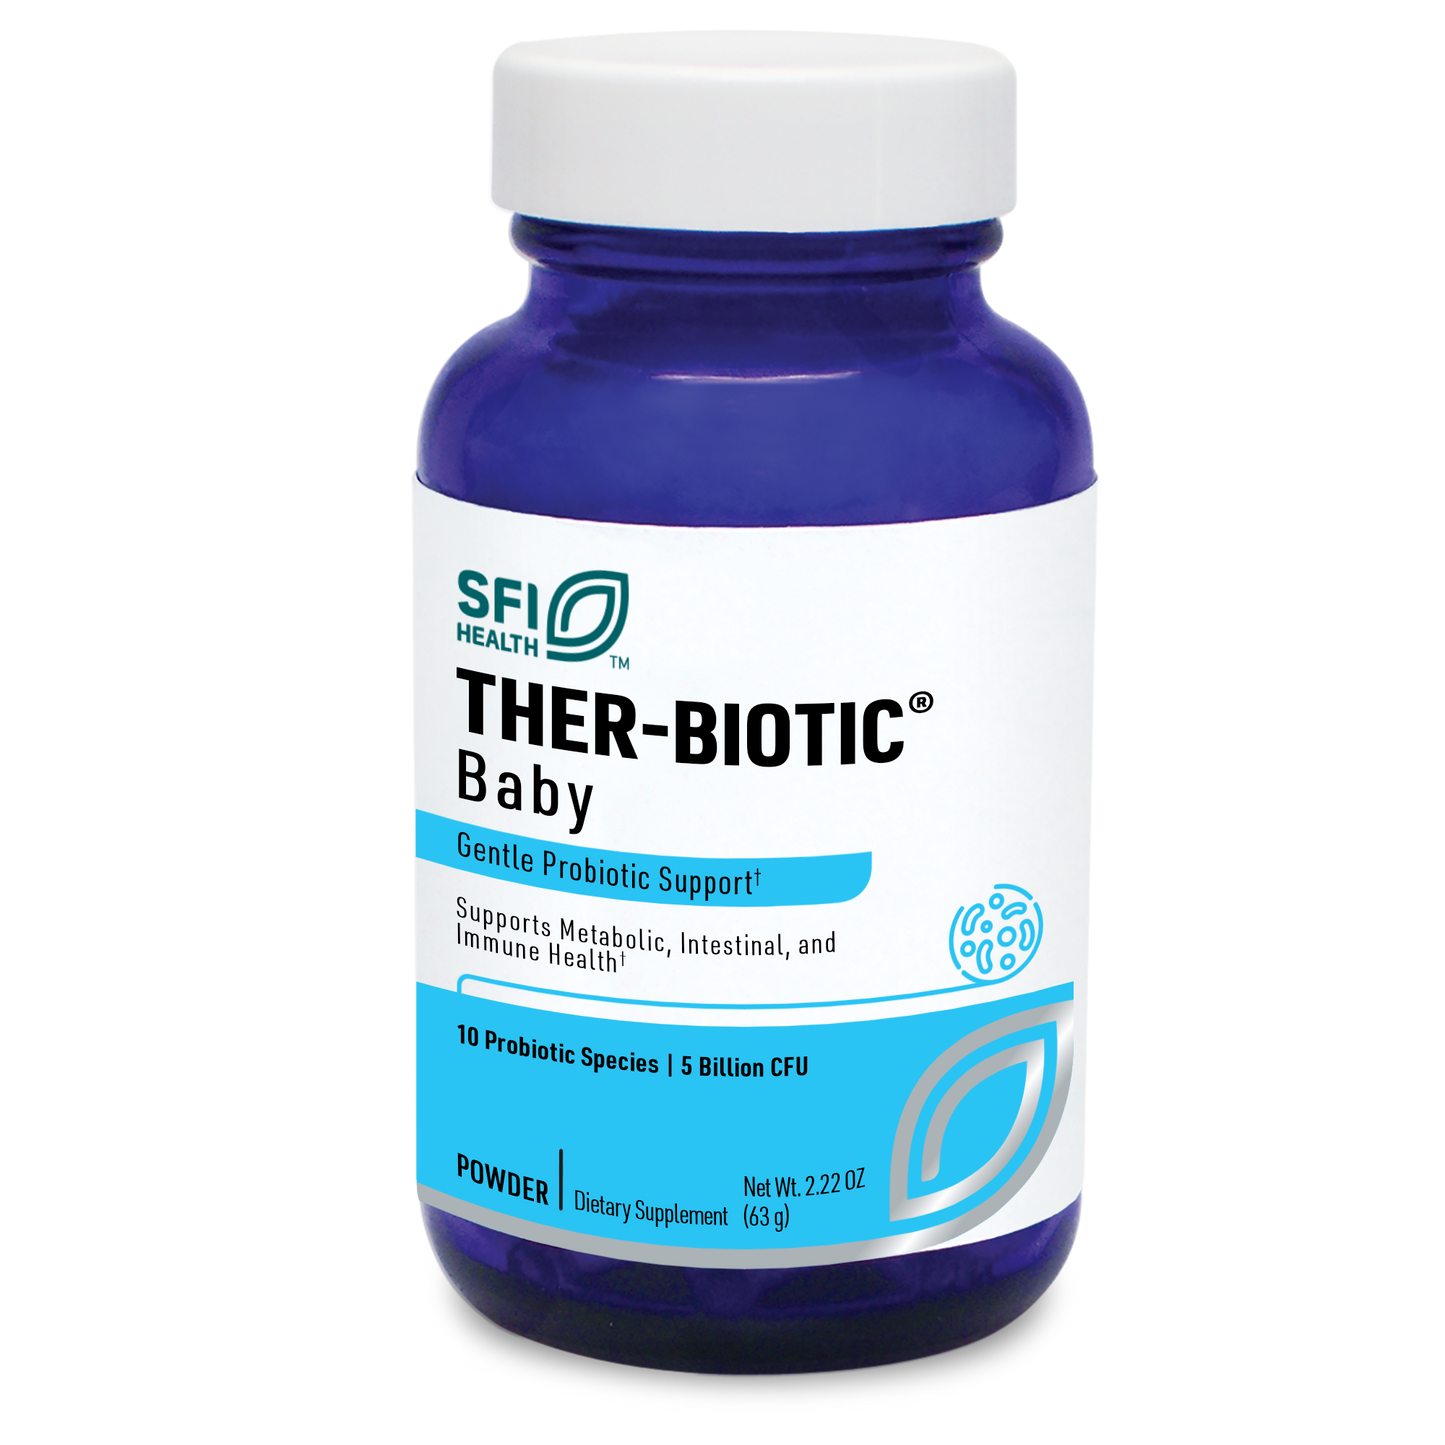 Ther-Biotic Baby Formula